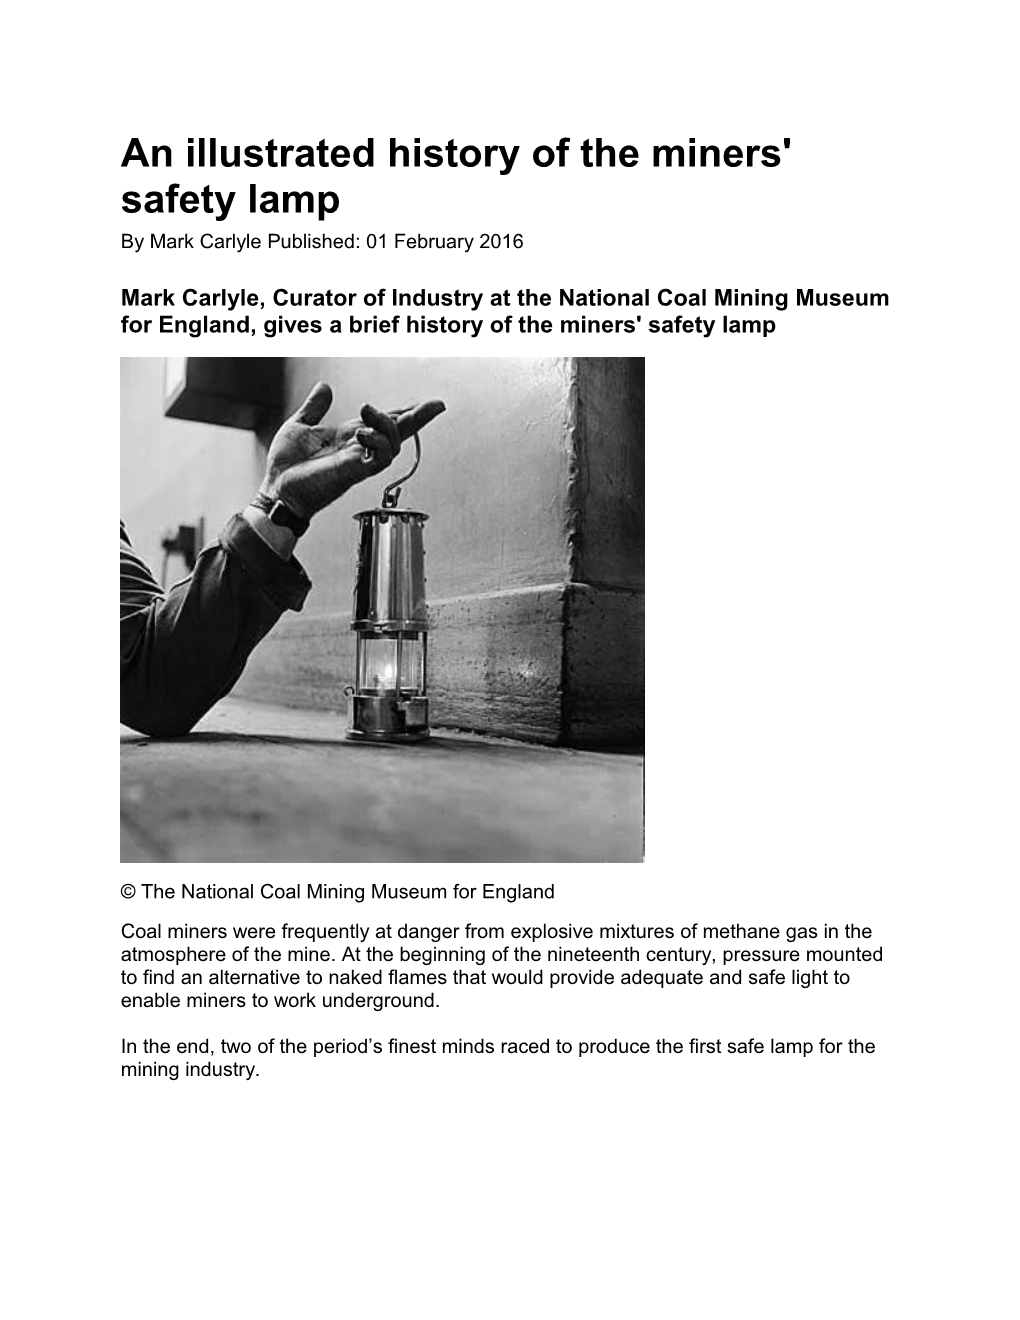 An Illustrated History of the Miners' Safety Lamp